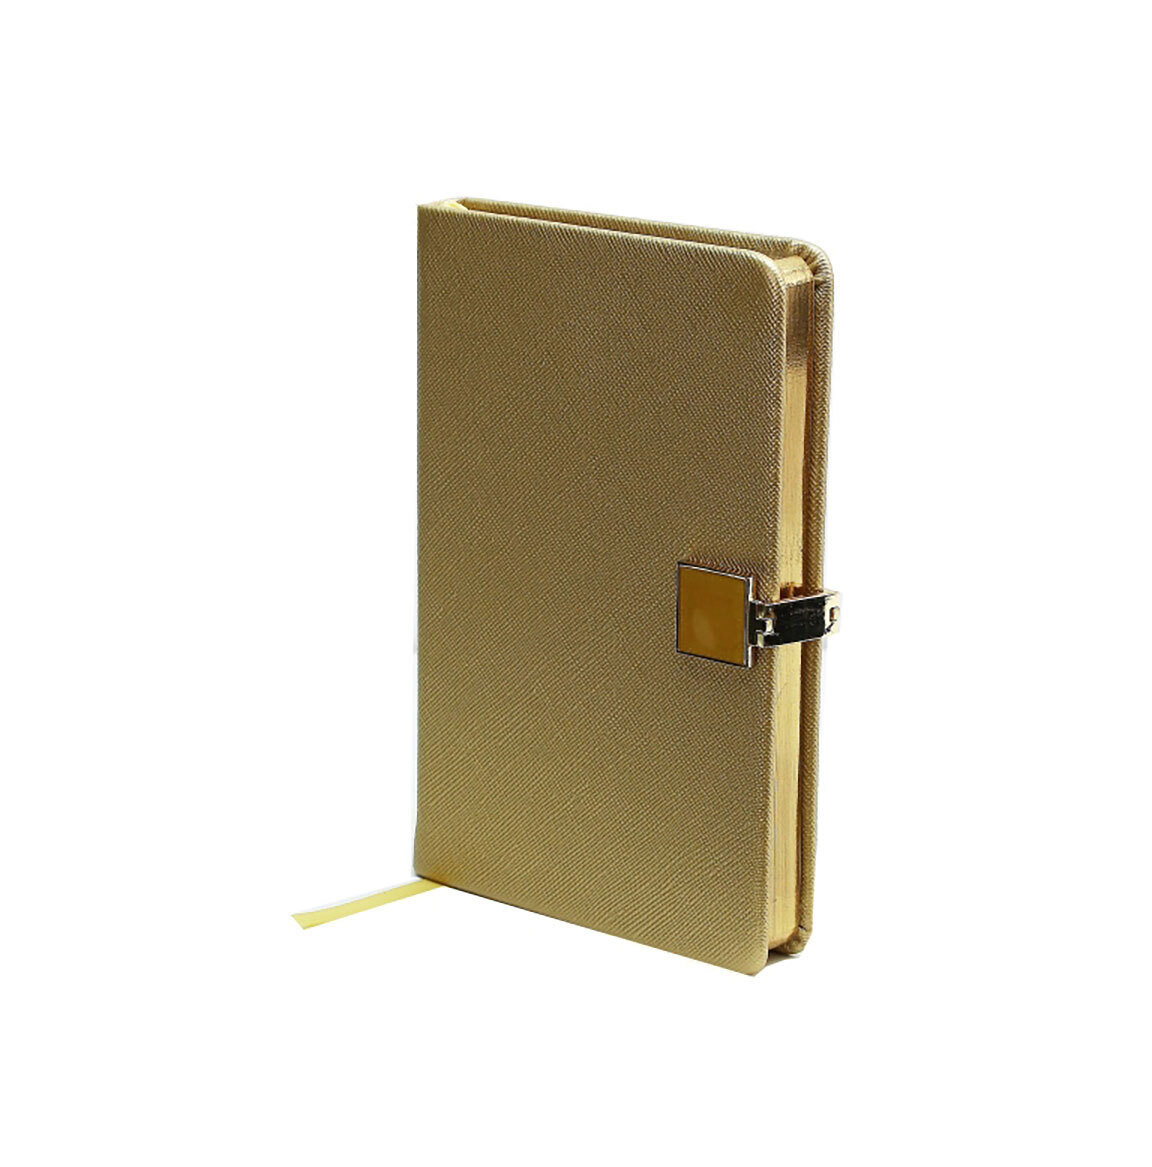 Addison Ross Gold & Gold A6 Notebook A6 Inch Pu Leather NB1200